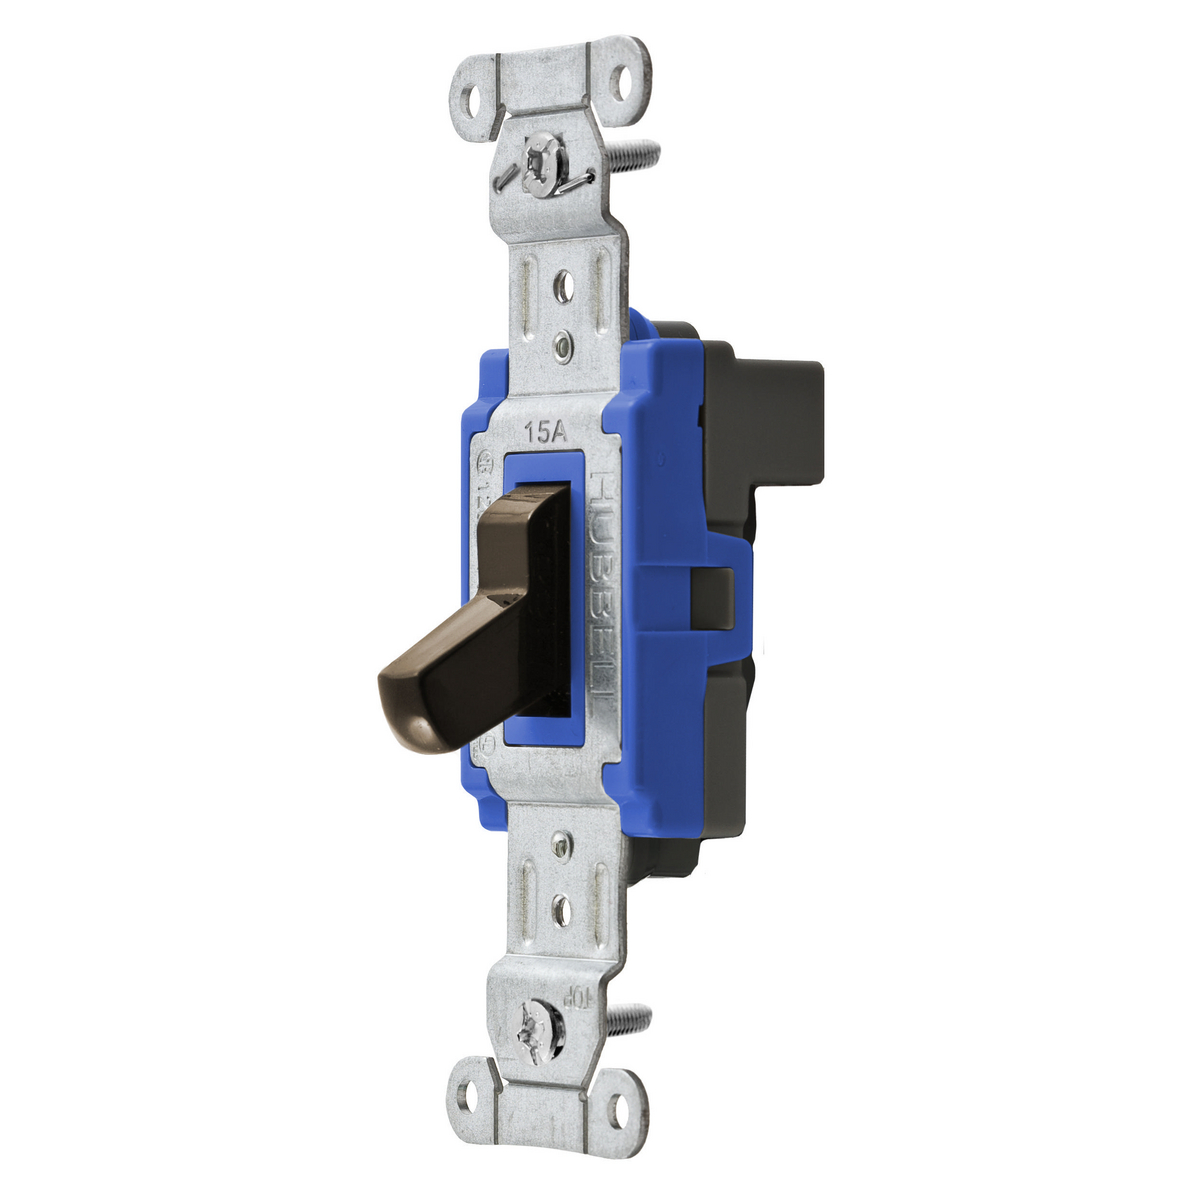 Industrialcommercial Grade Snapconnect Series Toggle Switches